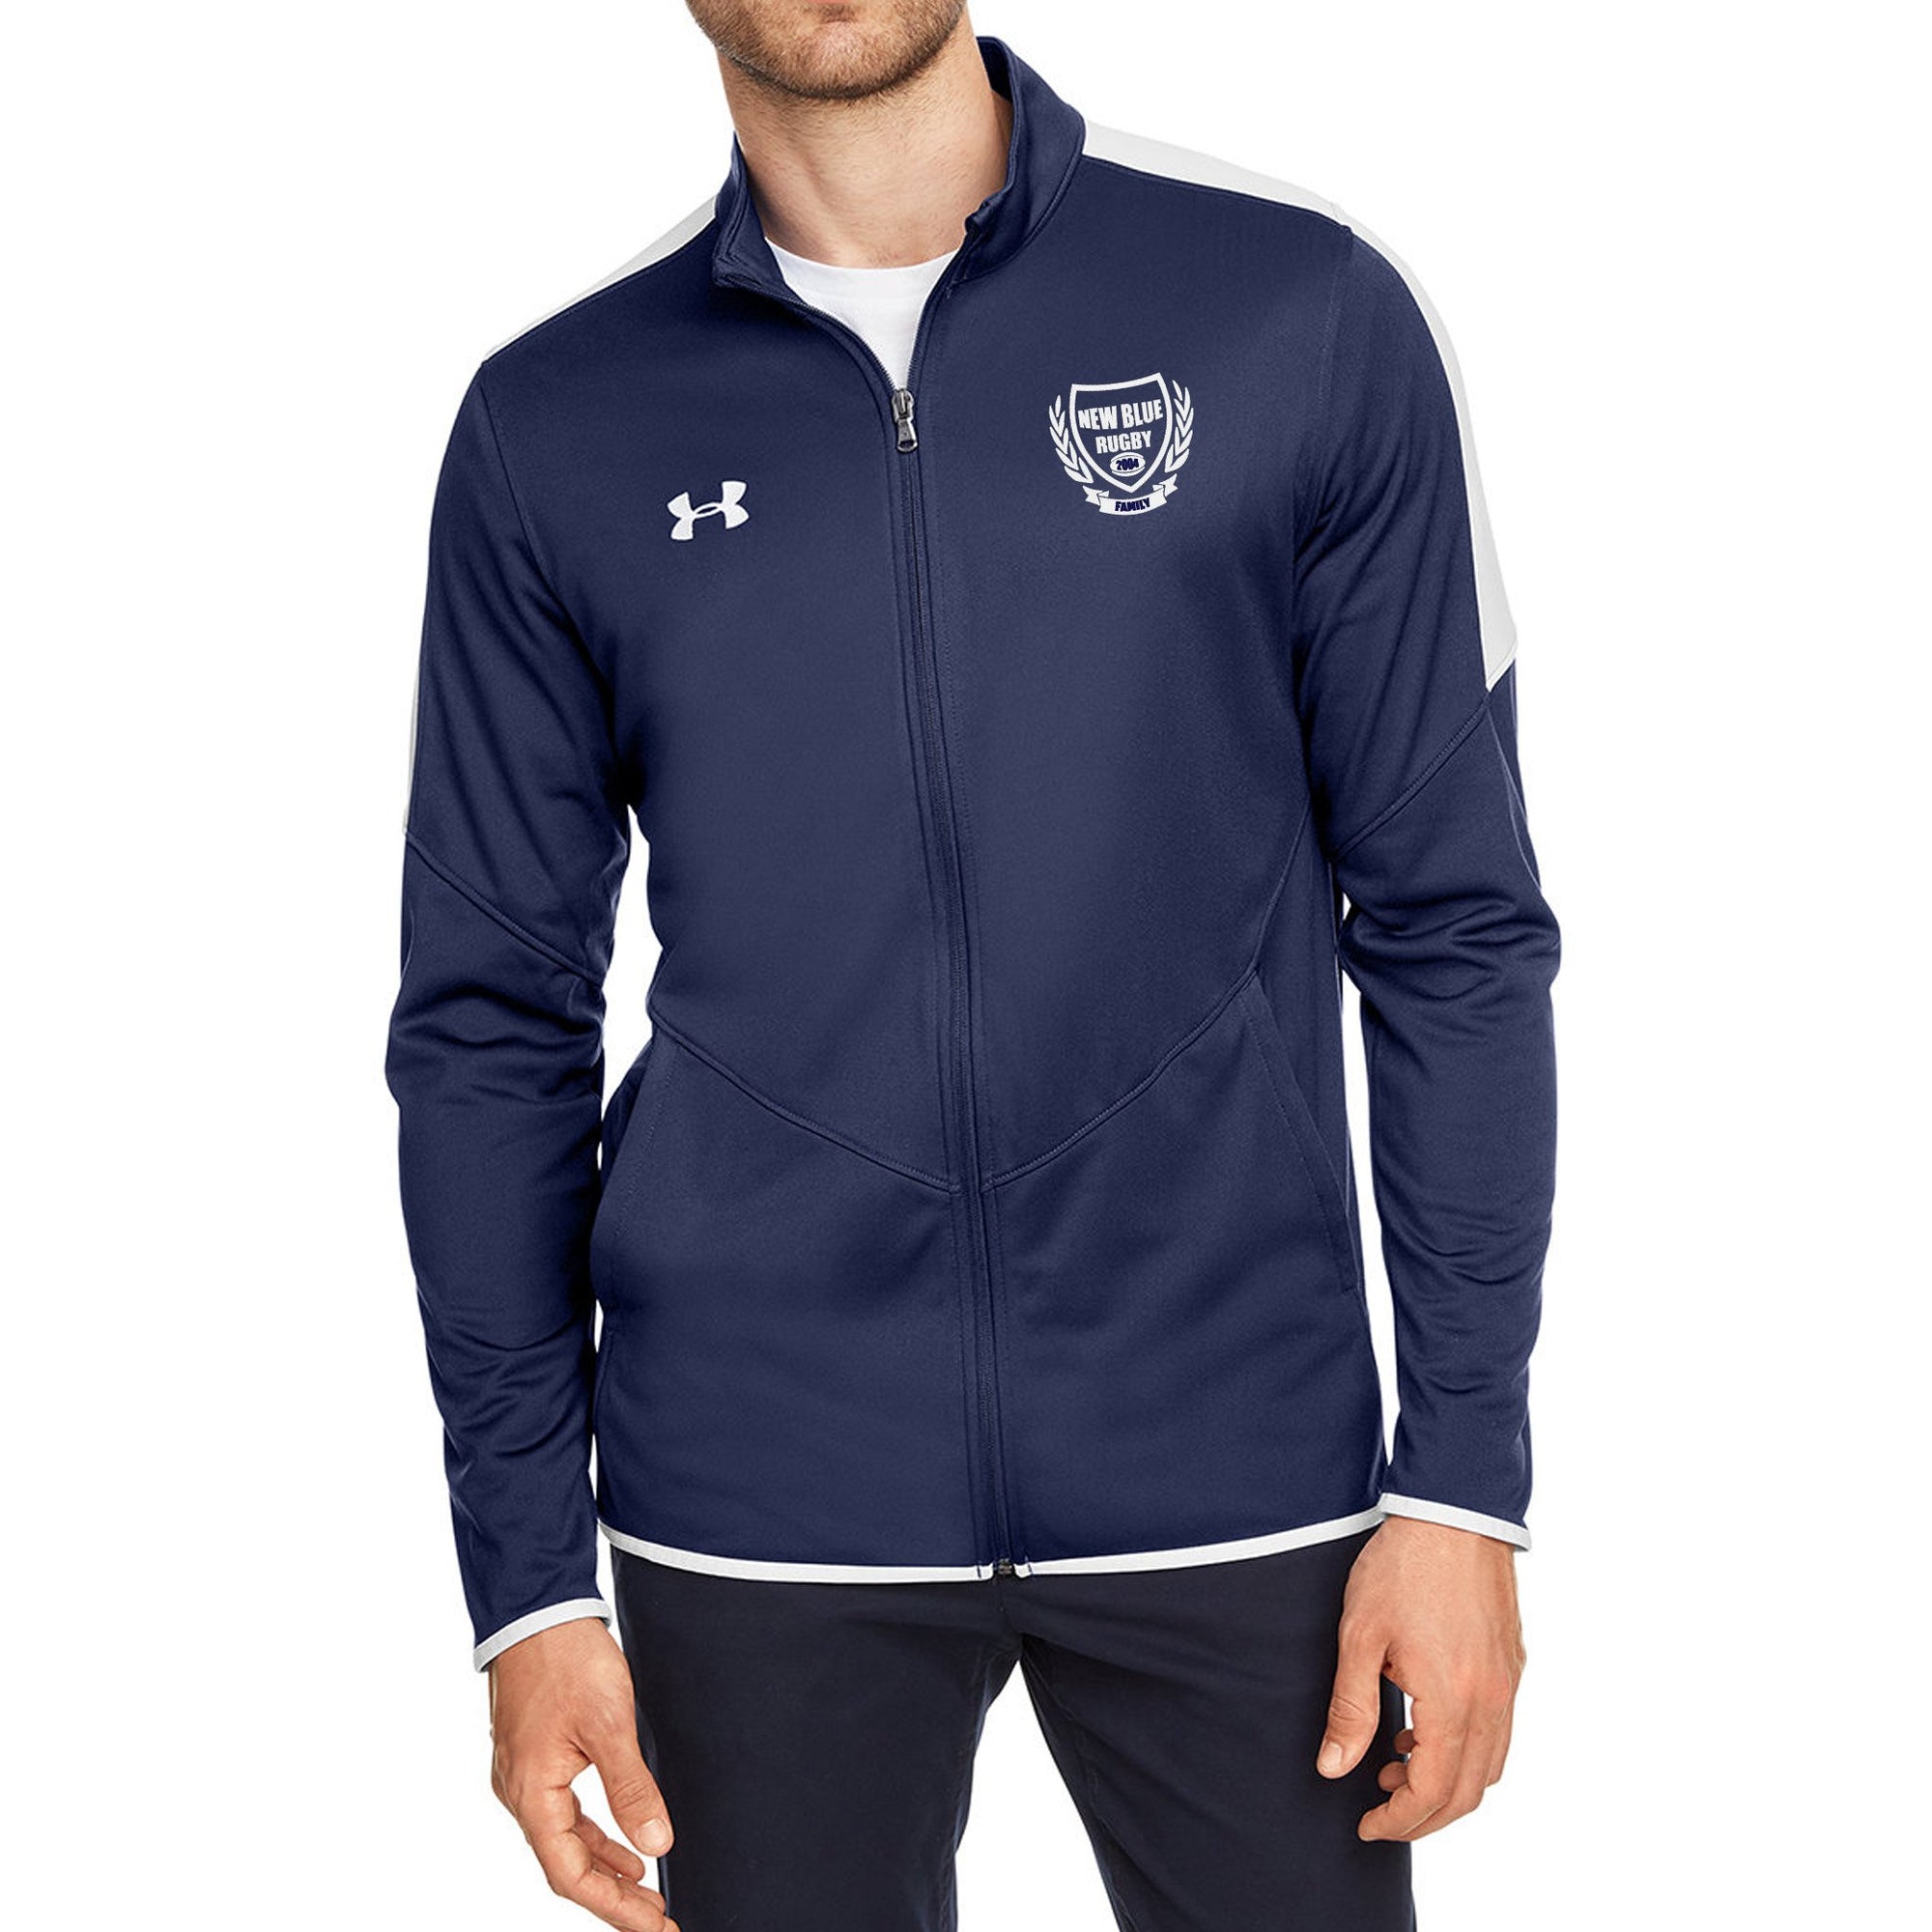 Rugby Imports New Blue Rugby Rival Knit Jacket